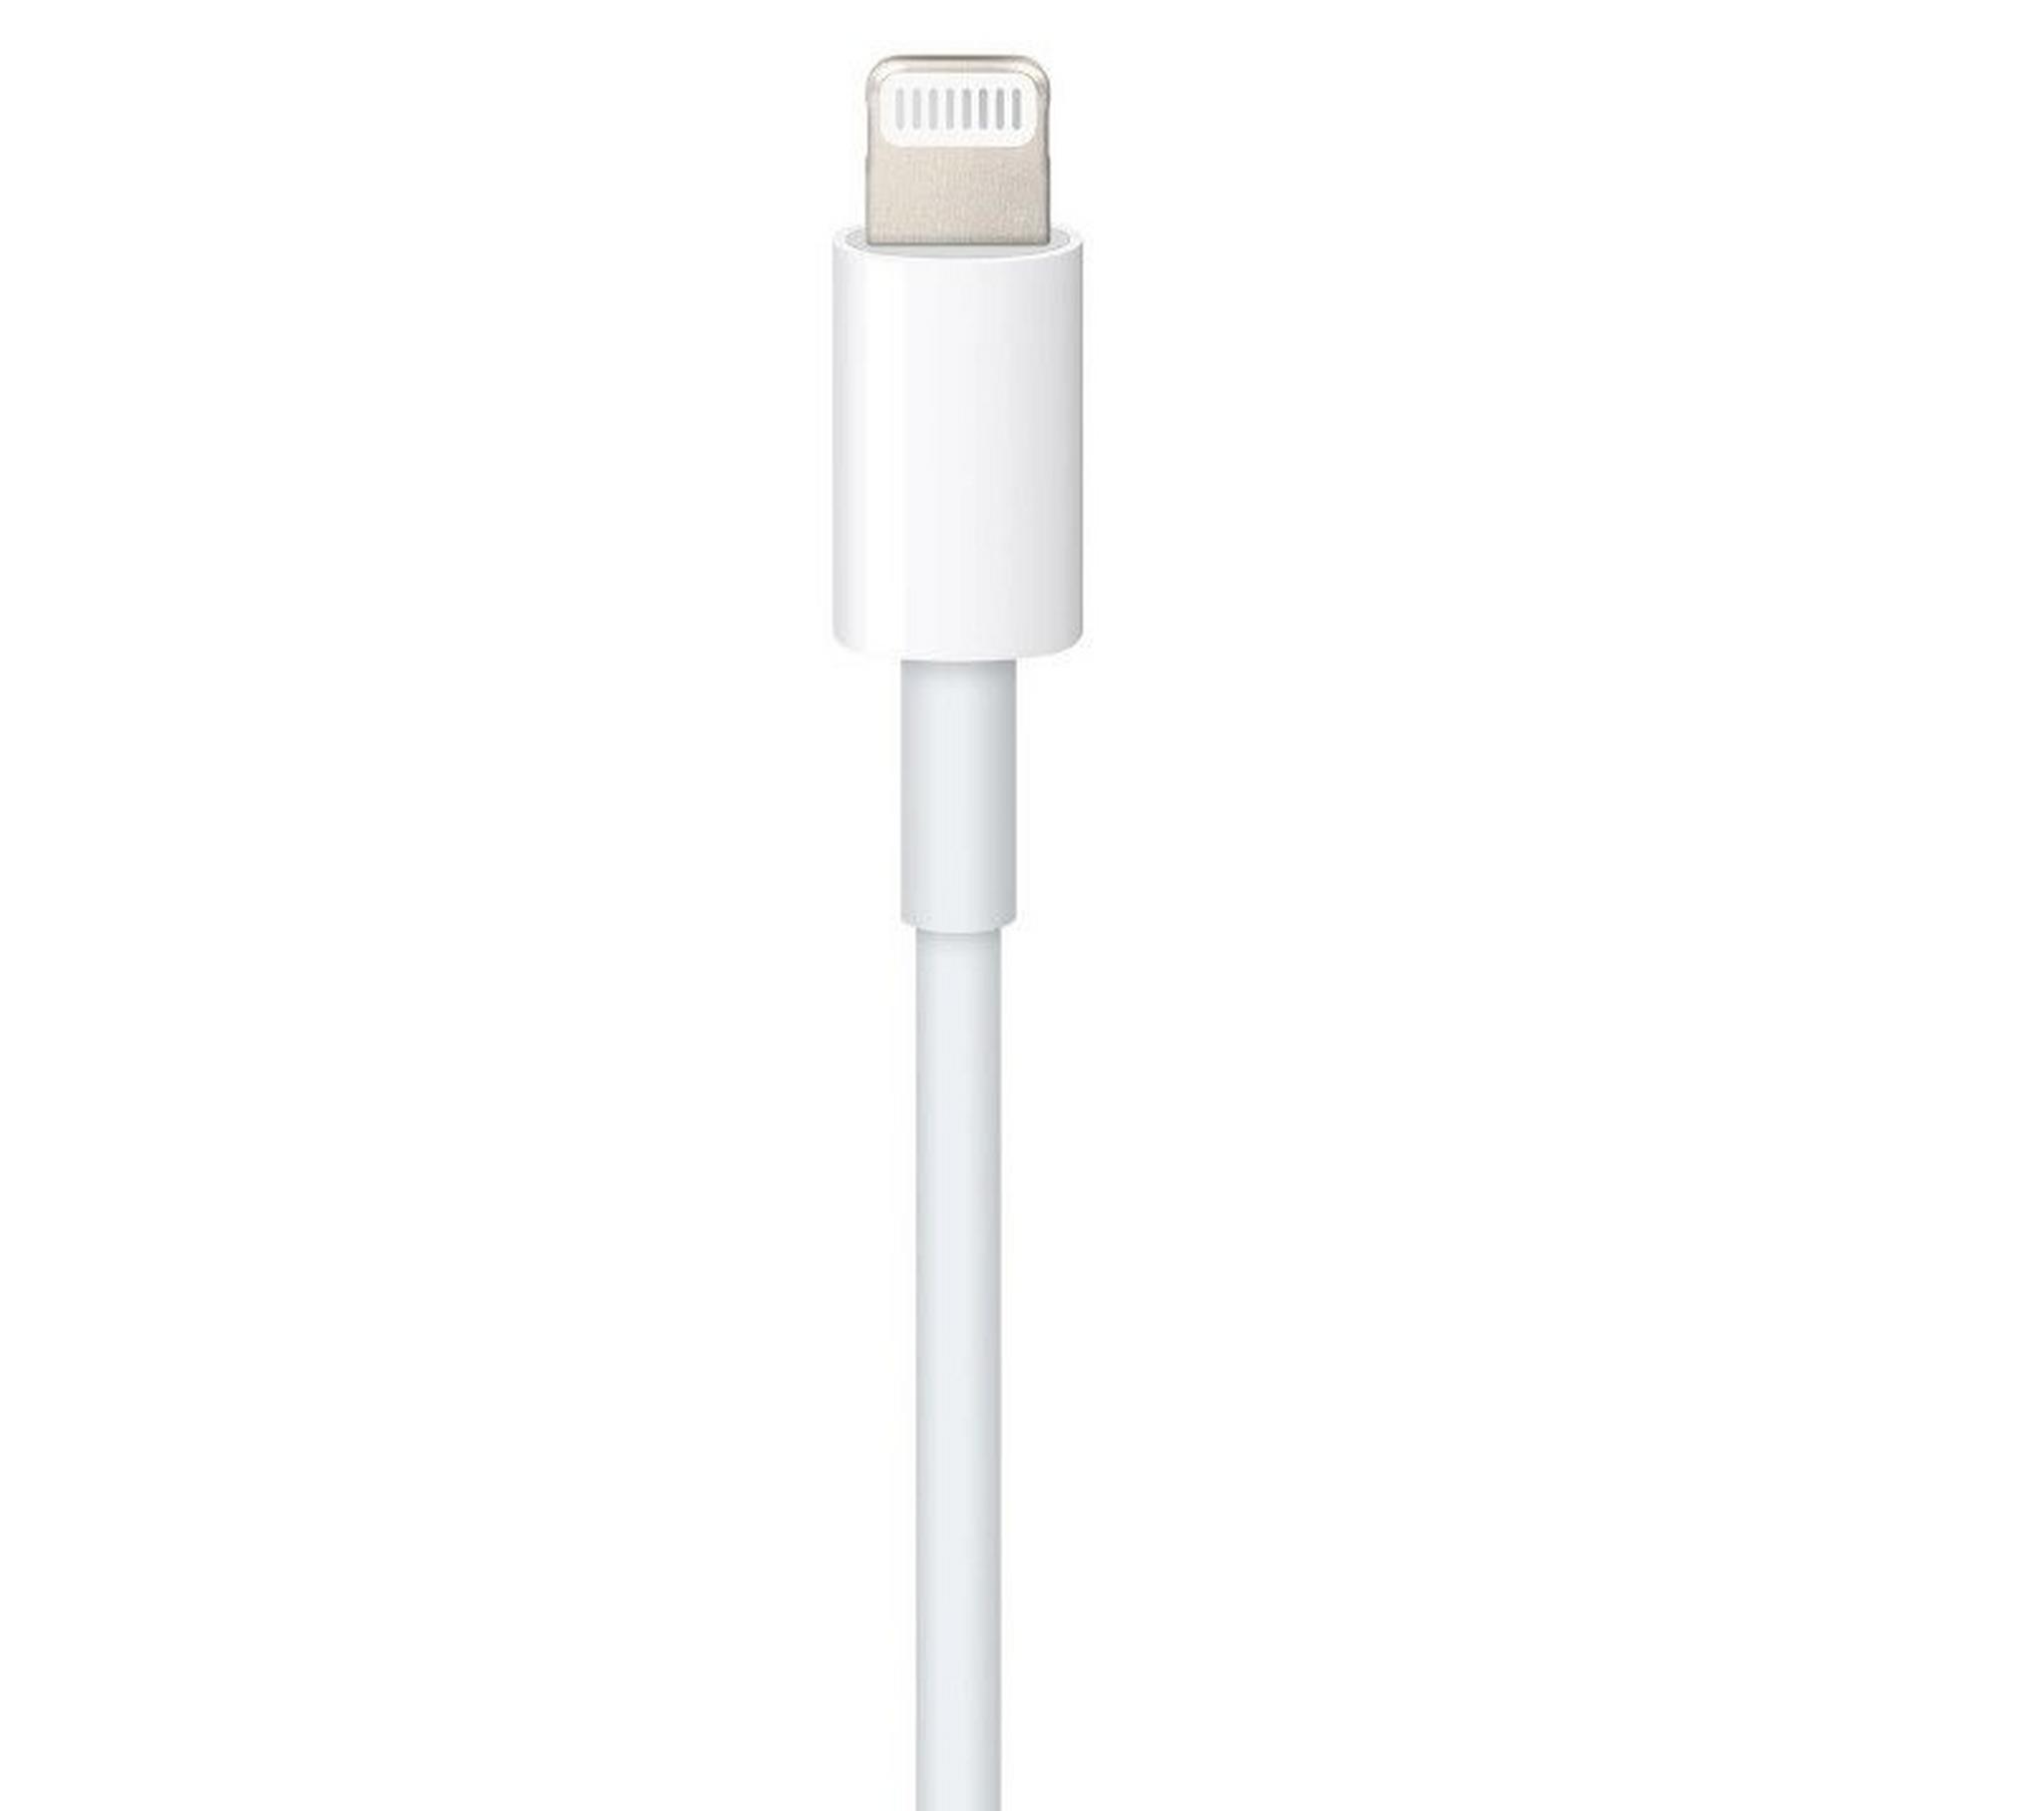 Apple USB-C to Lightning Cable 2 Meters (MKQ42AM/A) - White